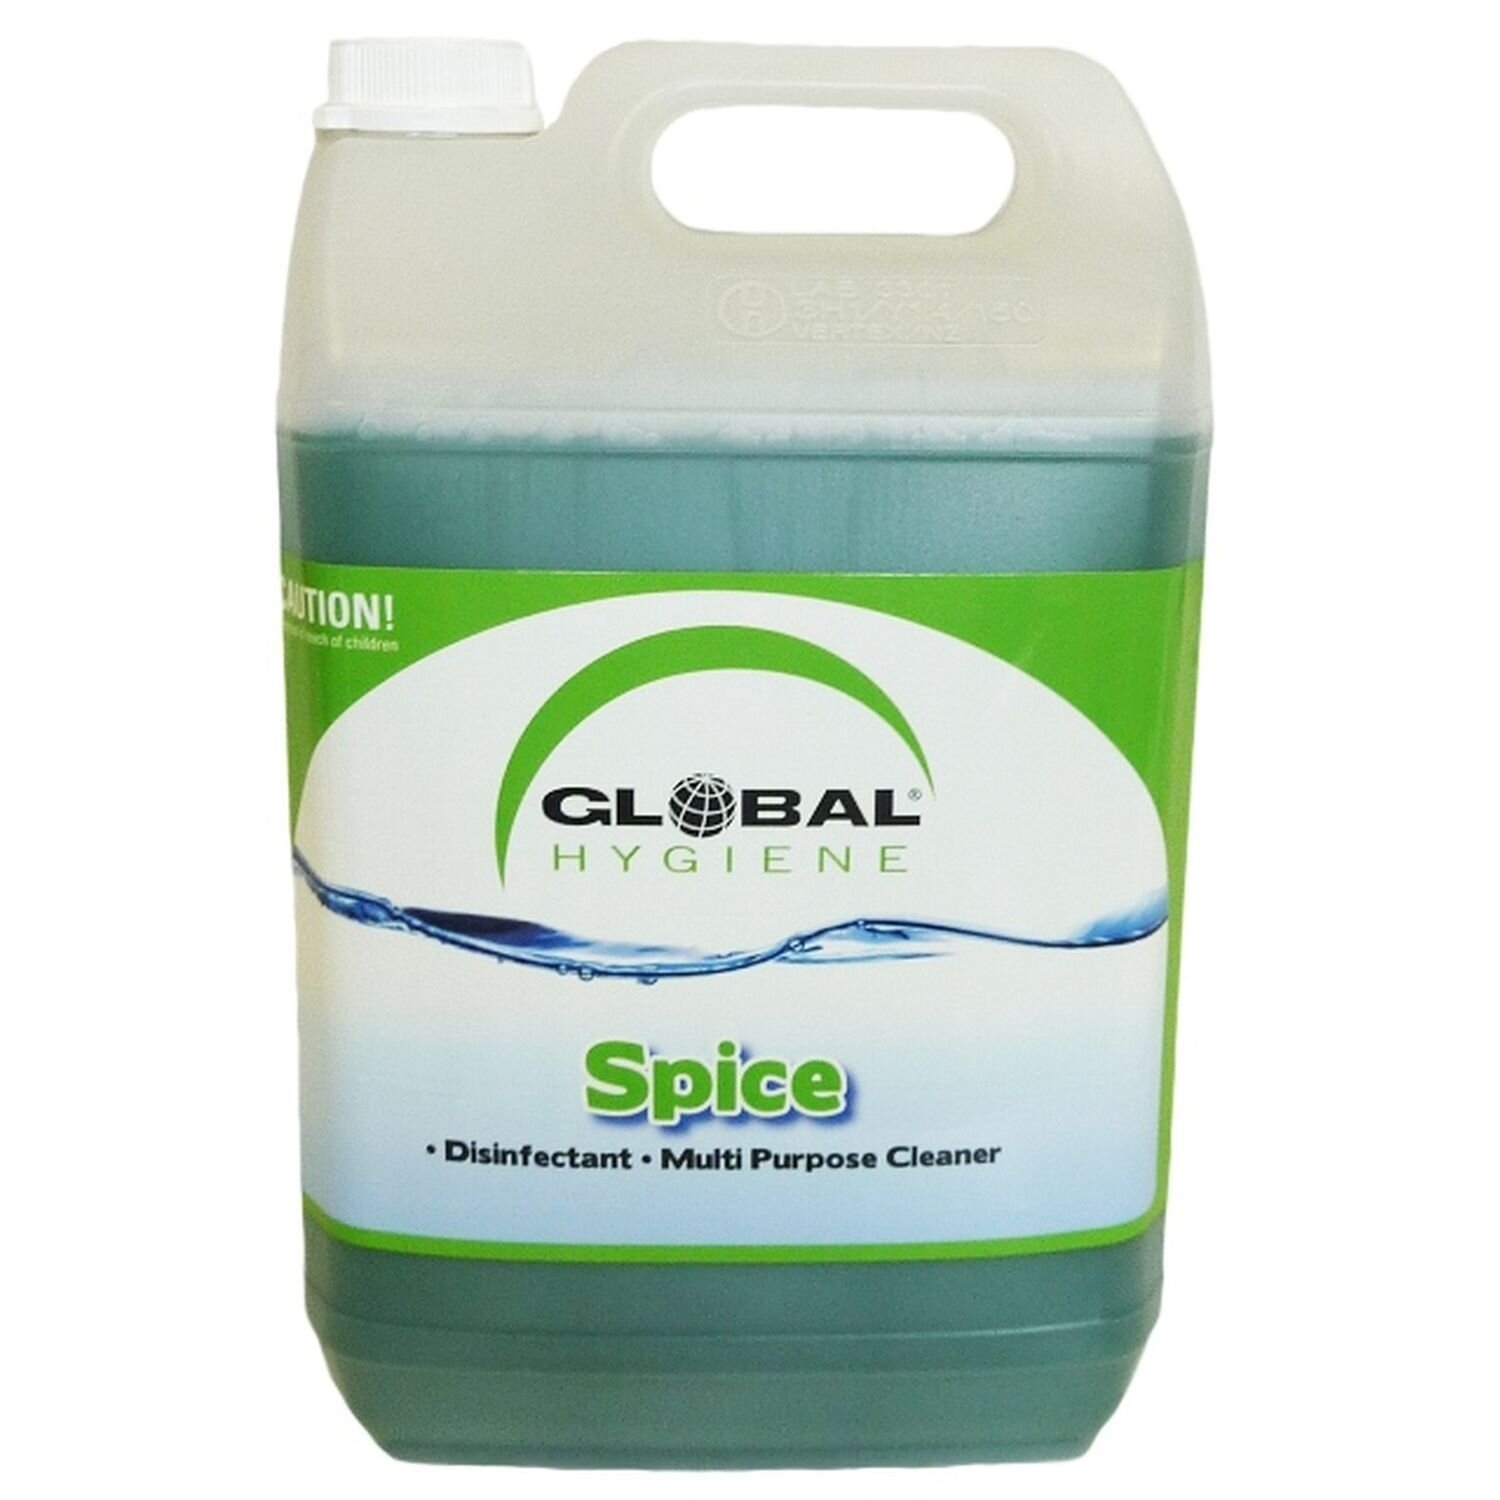 Global Spice Disinfectant Cleaner